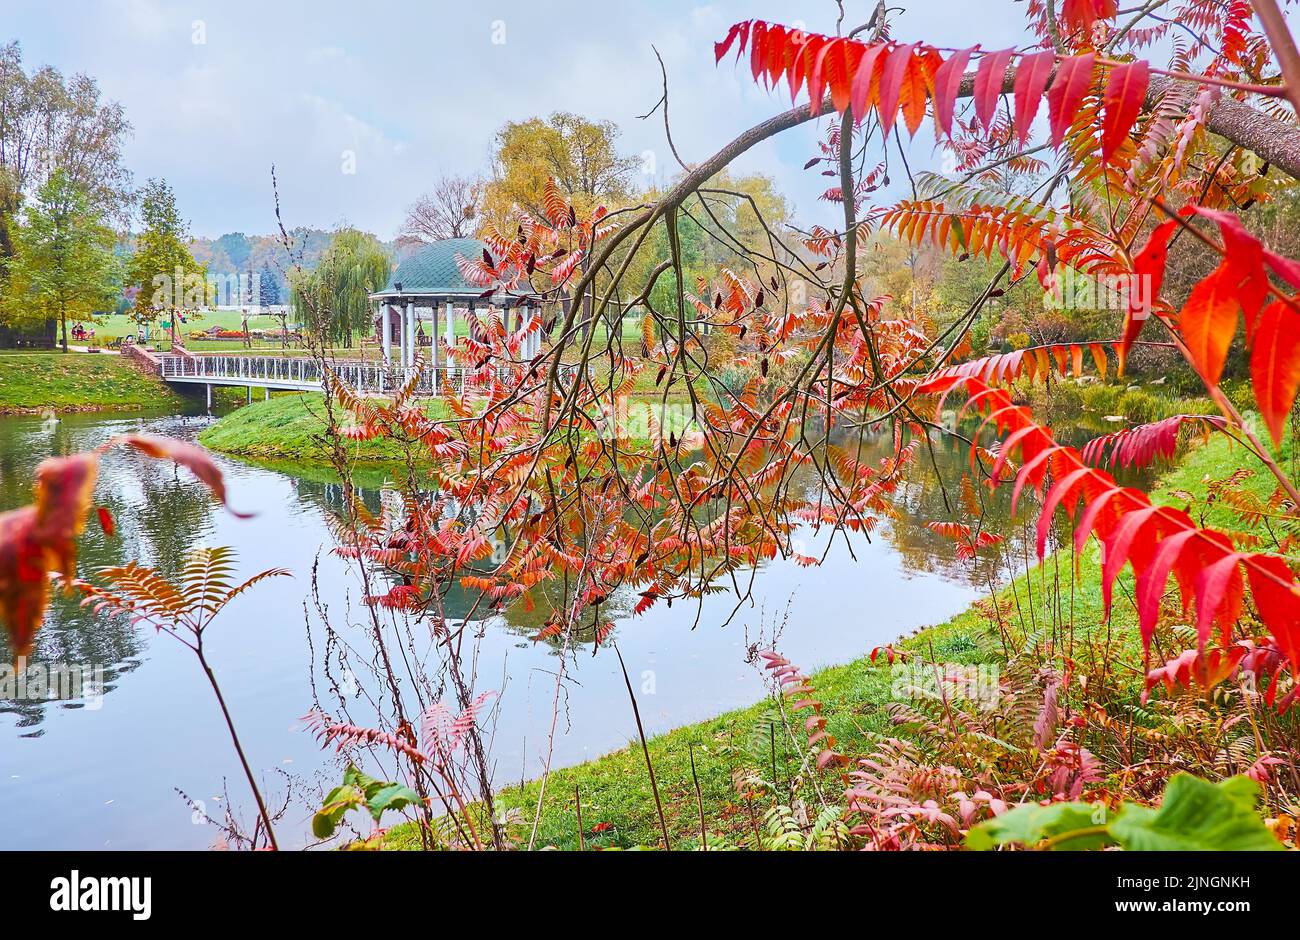 Palladin pond with a small gazebo and a footbridge through the staghorn sumac branches with bright red foliage, Feofania park, Kyiv, Ukraine Stock Photo